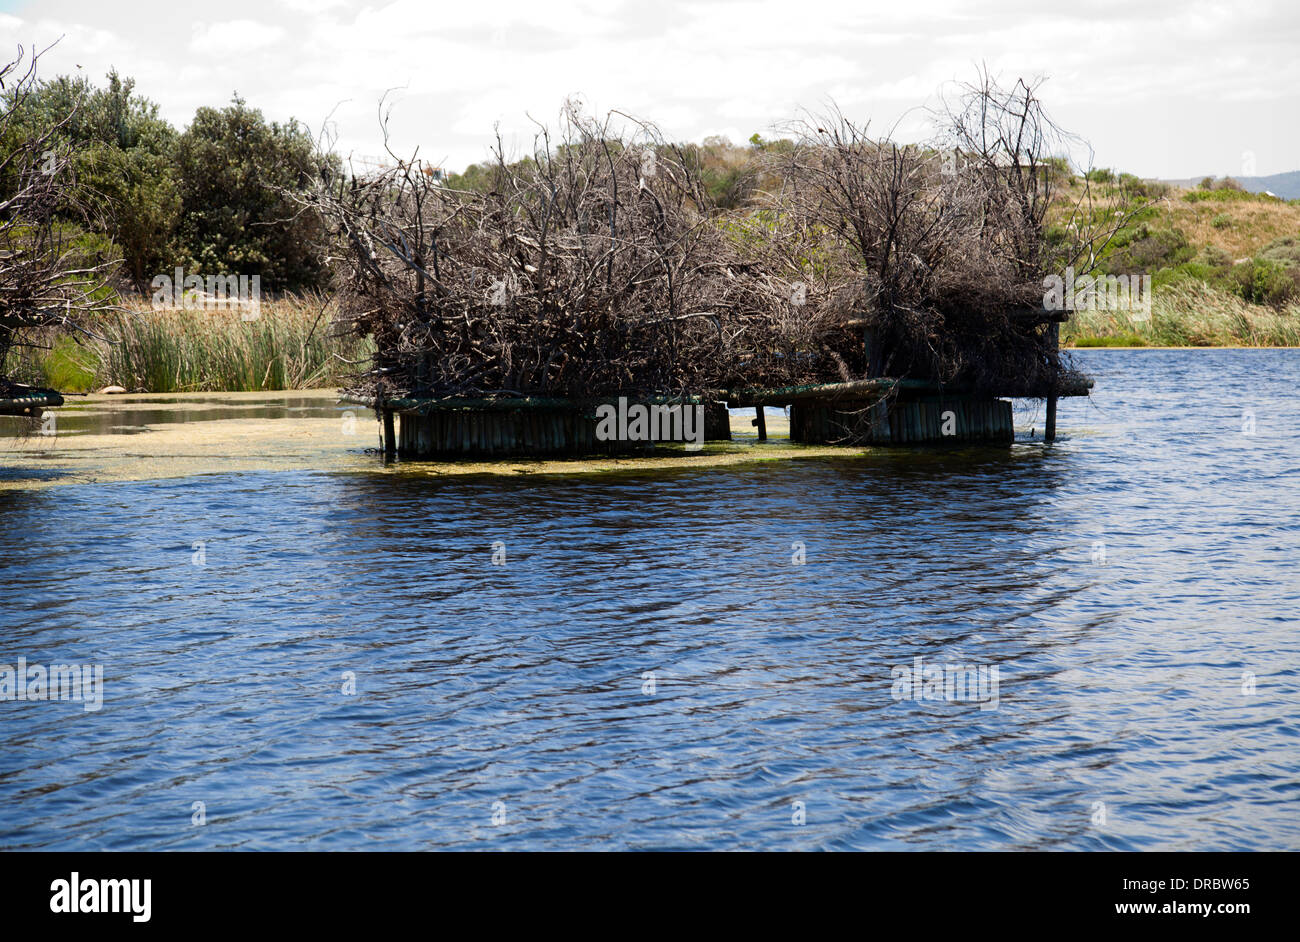 Intaka Island Nature Reserve - Man Made Structures on Lake for Wildlife - cape Town - South Africa Stock Photo